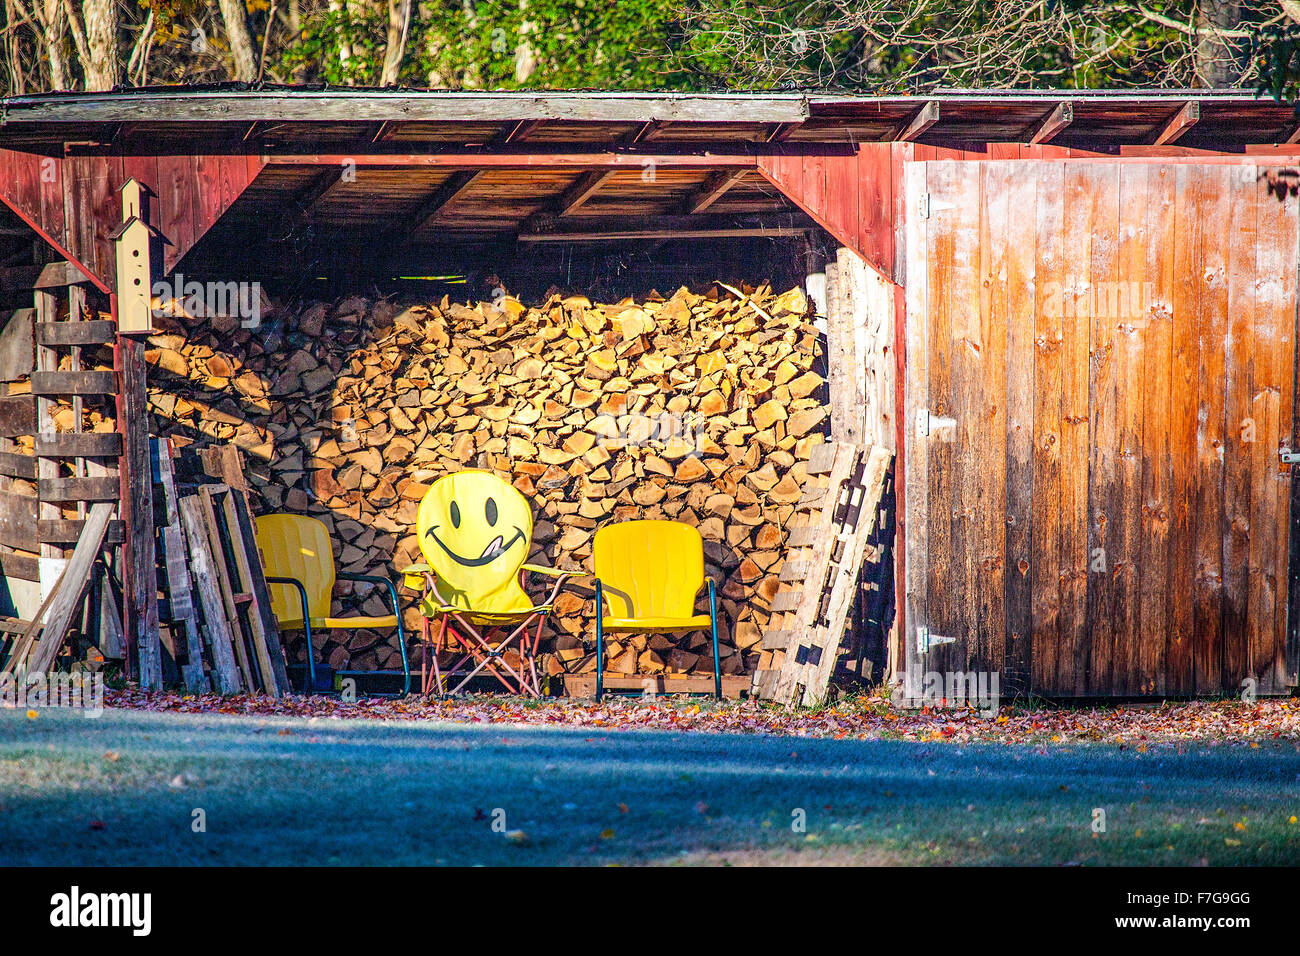 Panorama of a woodshed in New Hampshire, USA with three yellow chairs inside, one has a happy face emoji painted on its back. Stock Photo